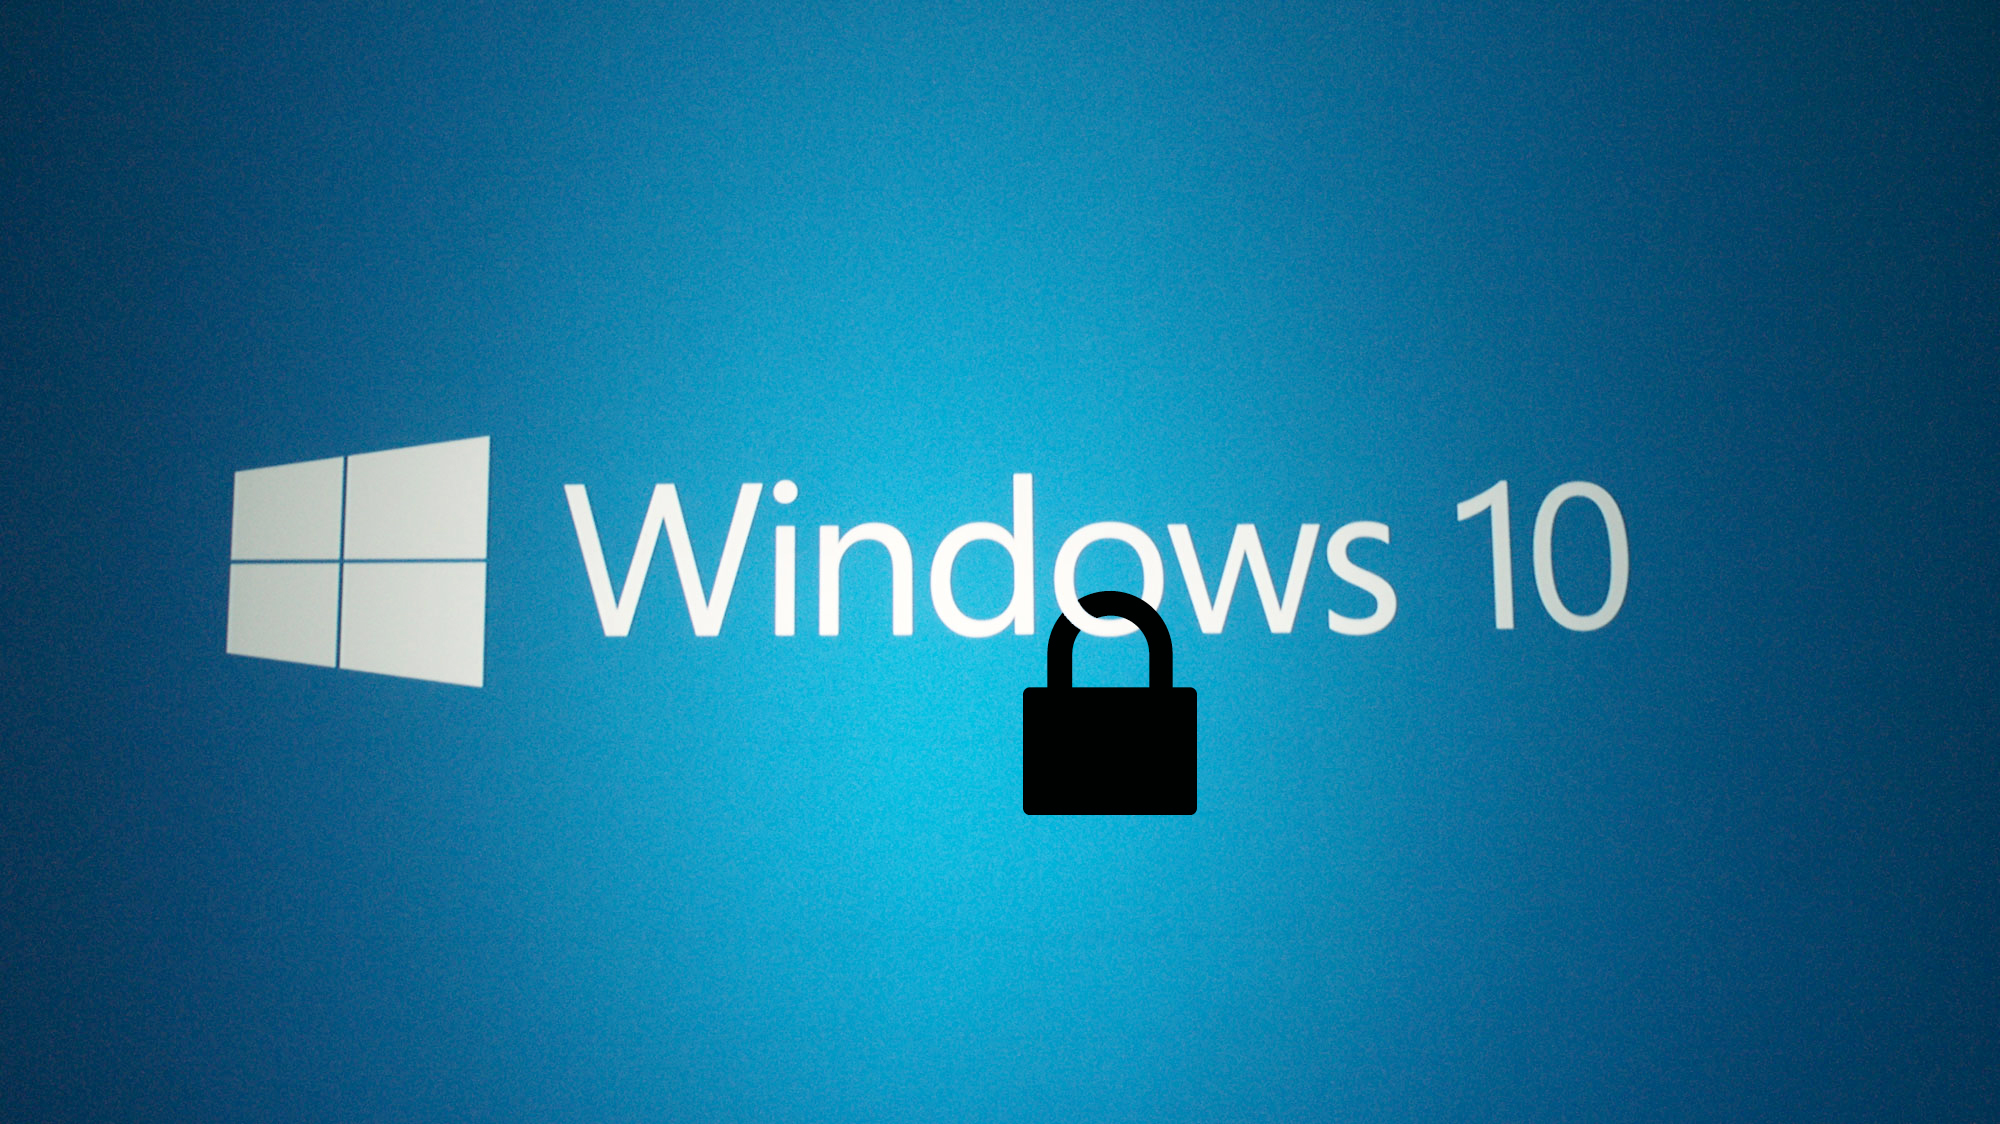 How to Strengthen Security on Windows 10 Networks